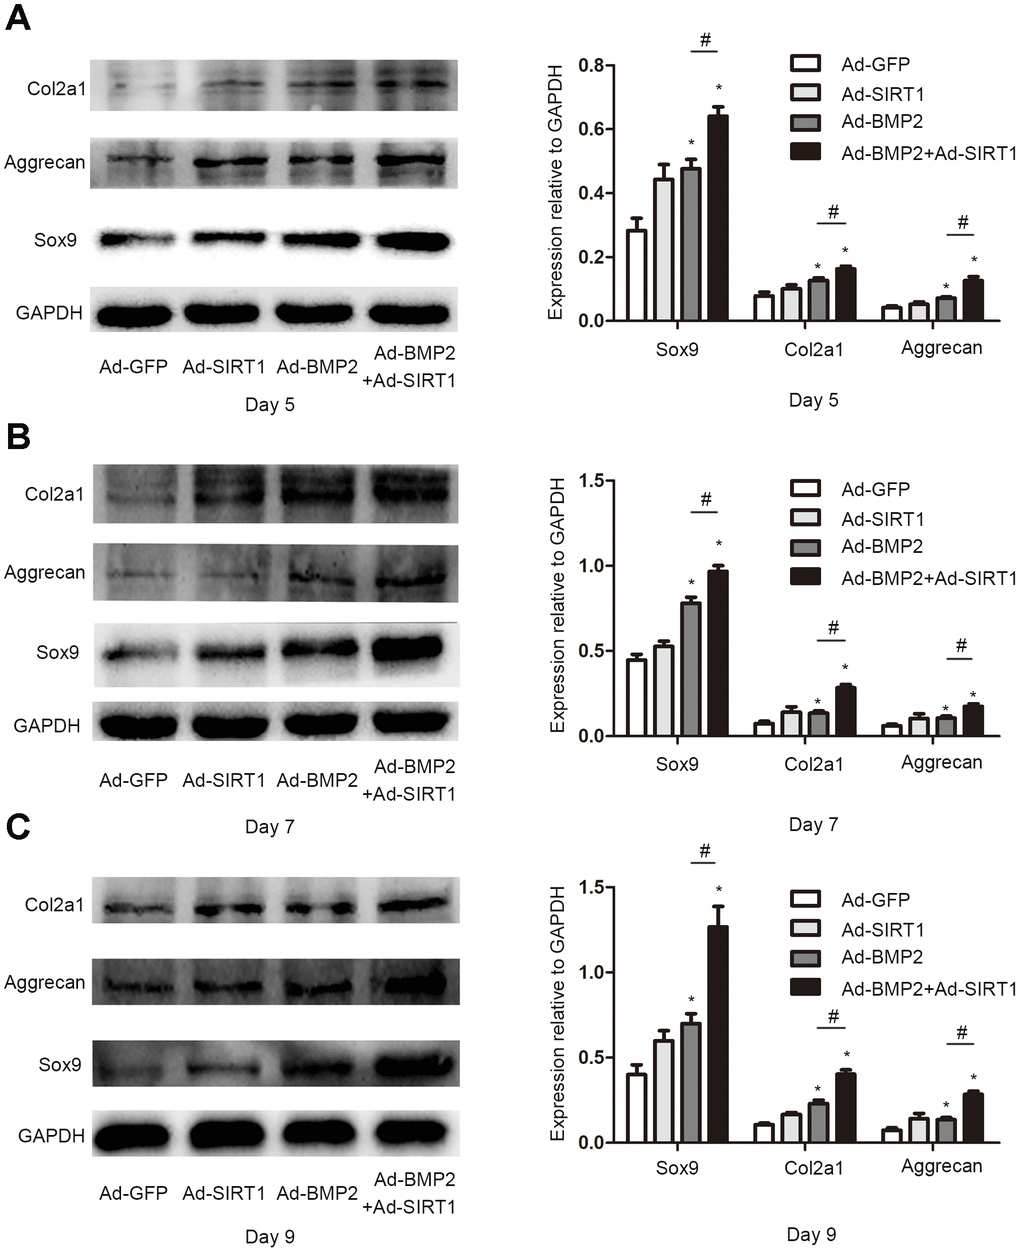 SIRT1 potentiated the BMP2-induced expression of chondrogenic differentiation makers. (A) The Sox9, Col2a1, and aggrecan protein levels in C3H10T1/2 cells infected with Ad-GFP, Ad-SIRT1, Ad-BMP2, or Ad-BMP2+Ad-SIRT1 for 5 days. (B) The Sox9, Col2a1, and aggrecan protein levels in C3H10T1/2 cells infected with Ad-GFP, Ad-SIRT1, Ad-BMP2, or Ad-BMP2+Ad-SIRT1 for 7 days. (C) The Sox9, Col2a1, and aggrecan protein levels in C3H10T1/2 cells infected with Ad-GFP, Ad-SIRT1, Ad-BMP2, or Ad-BMP2+Ad-SIRT1 for 9 days. All of the relative protein expression level results were compared to those of GAPDH using Quantity one. The data are denoted as the mean ± SD.*:p 